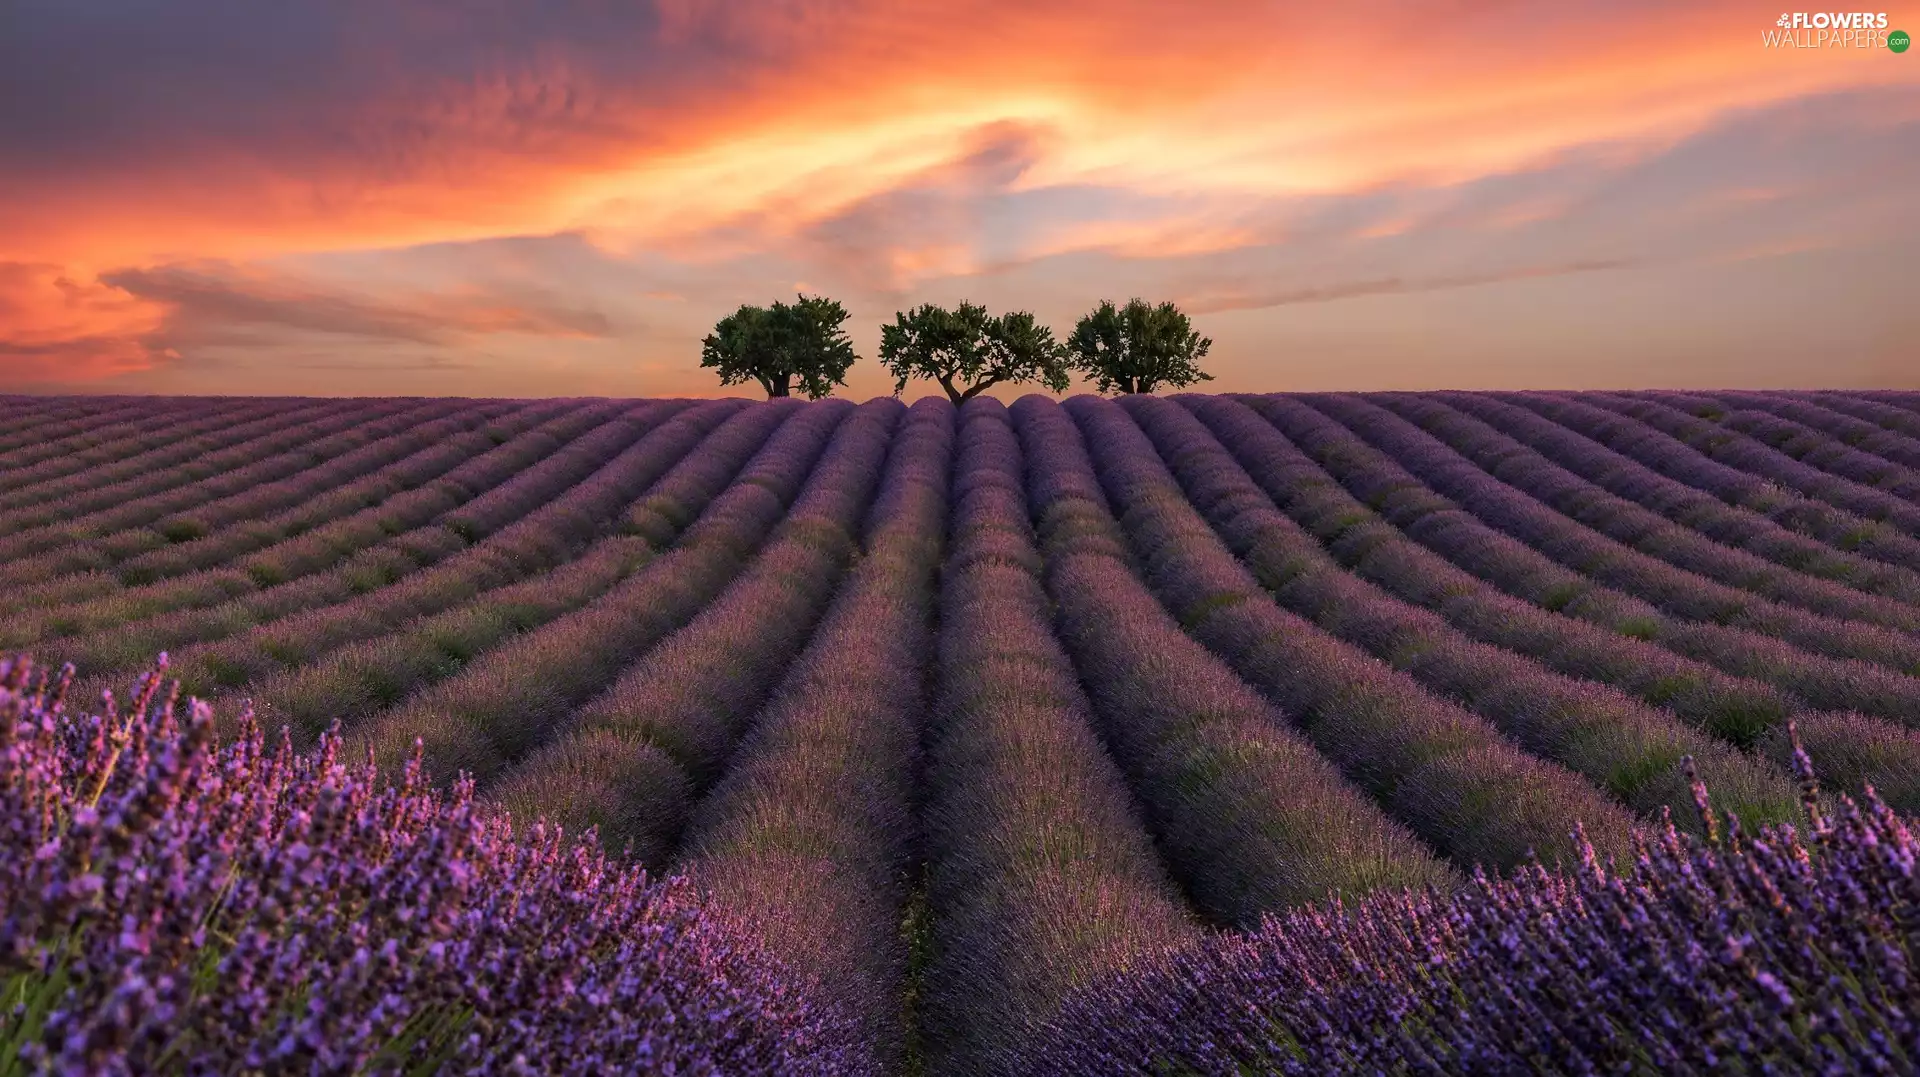 lavender, Great Sunsets, trees, viewes, Three, Field